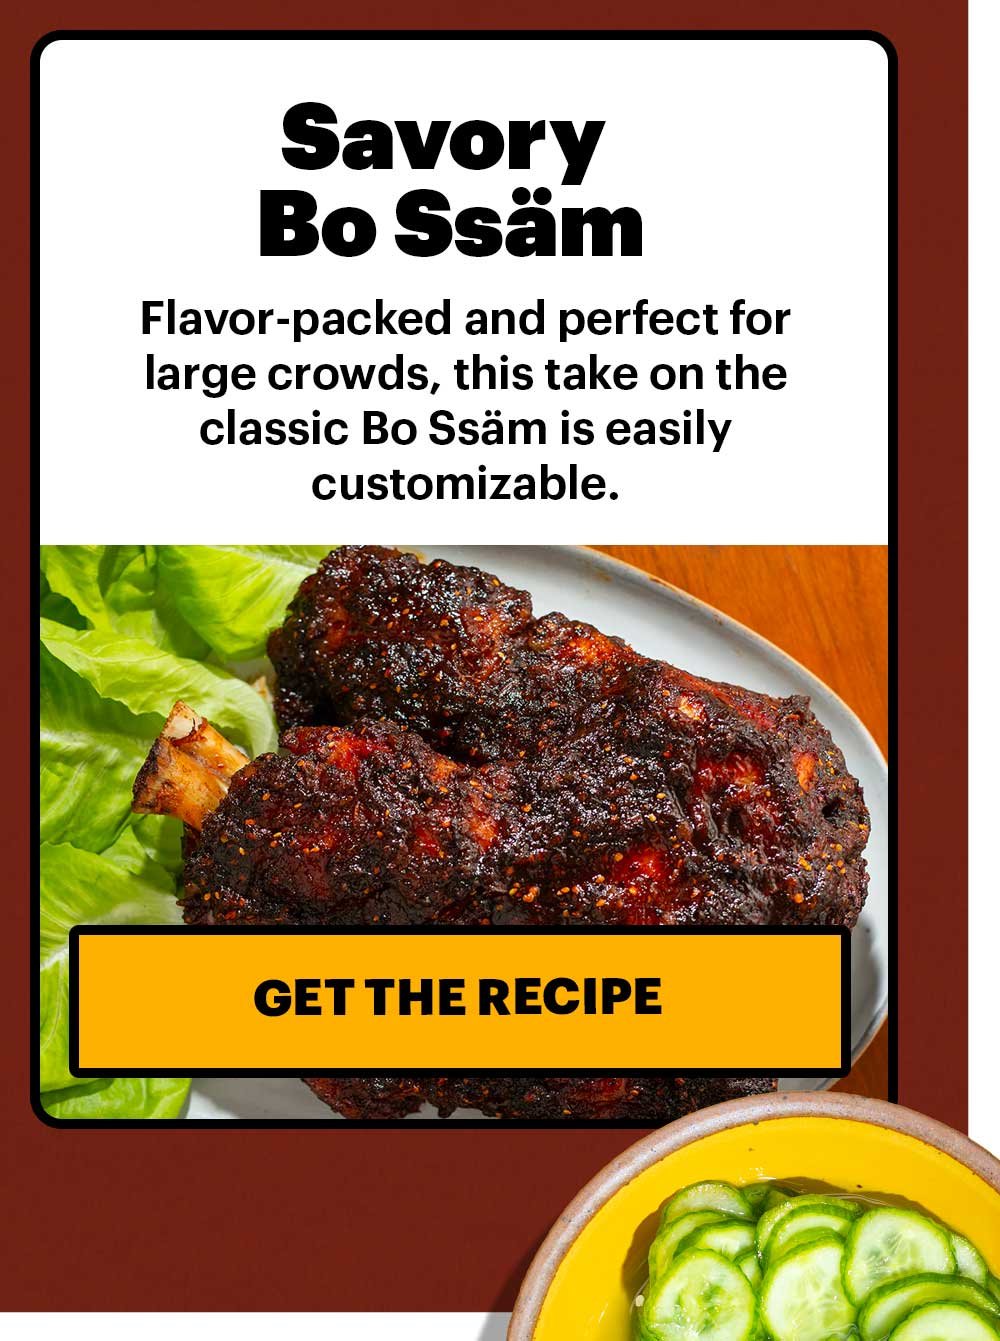 Savory Bo Ssäm. Flavor-packed and perfect for large crowds, this take on the classic Bo Ssäm is easily customizable. GET THE RECIPE